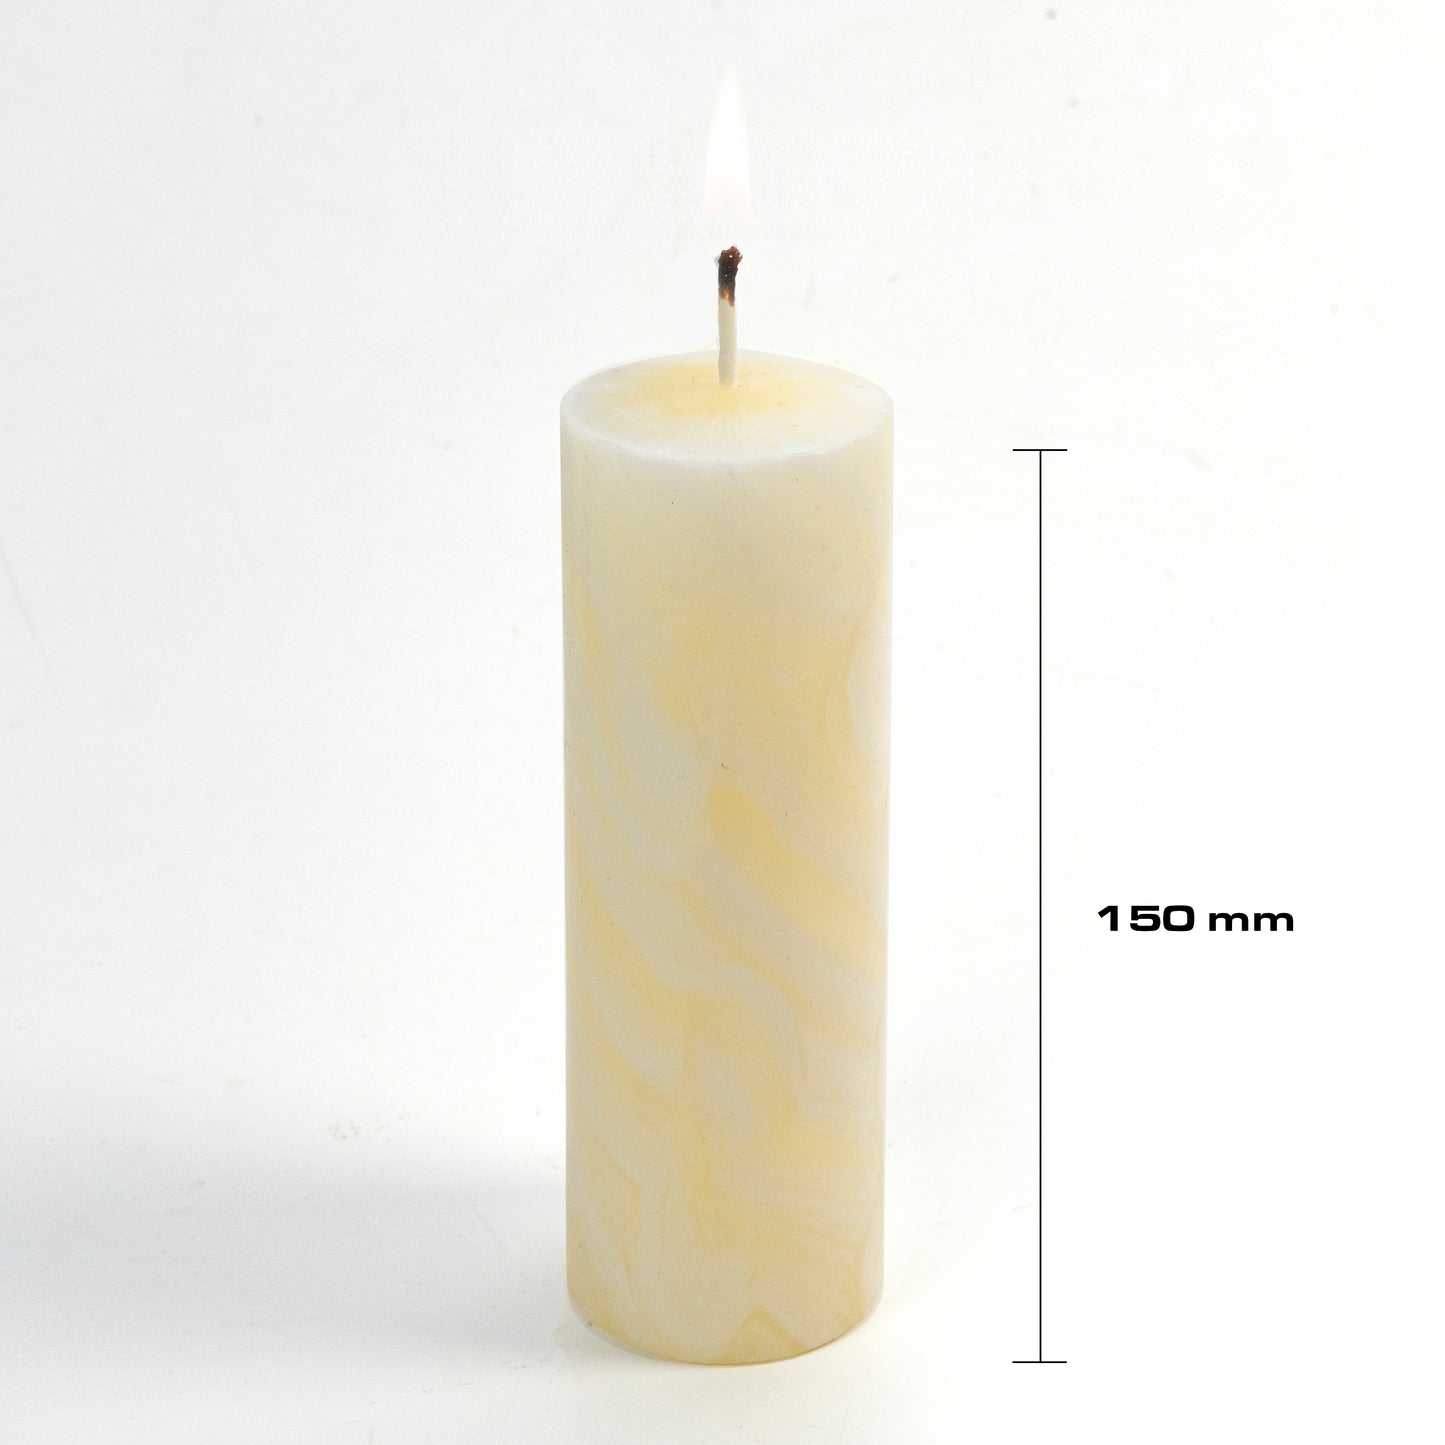 Candle factory pillar candle »H150 D50«, hand kneaded beeswax candle 